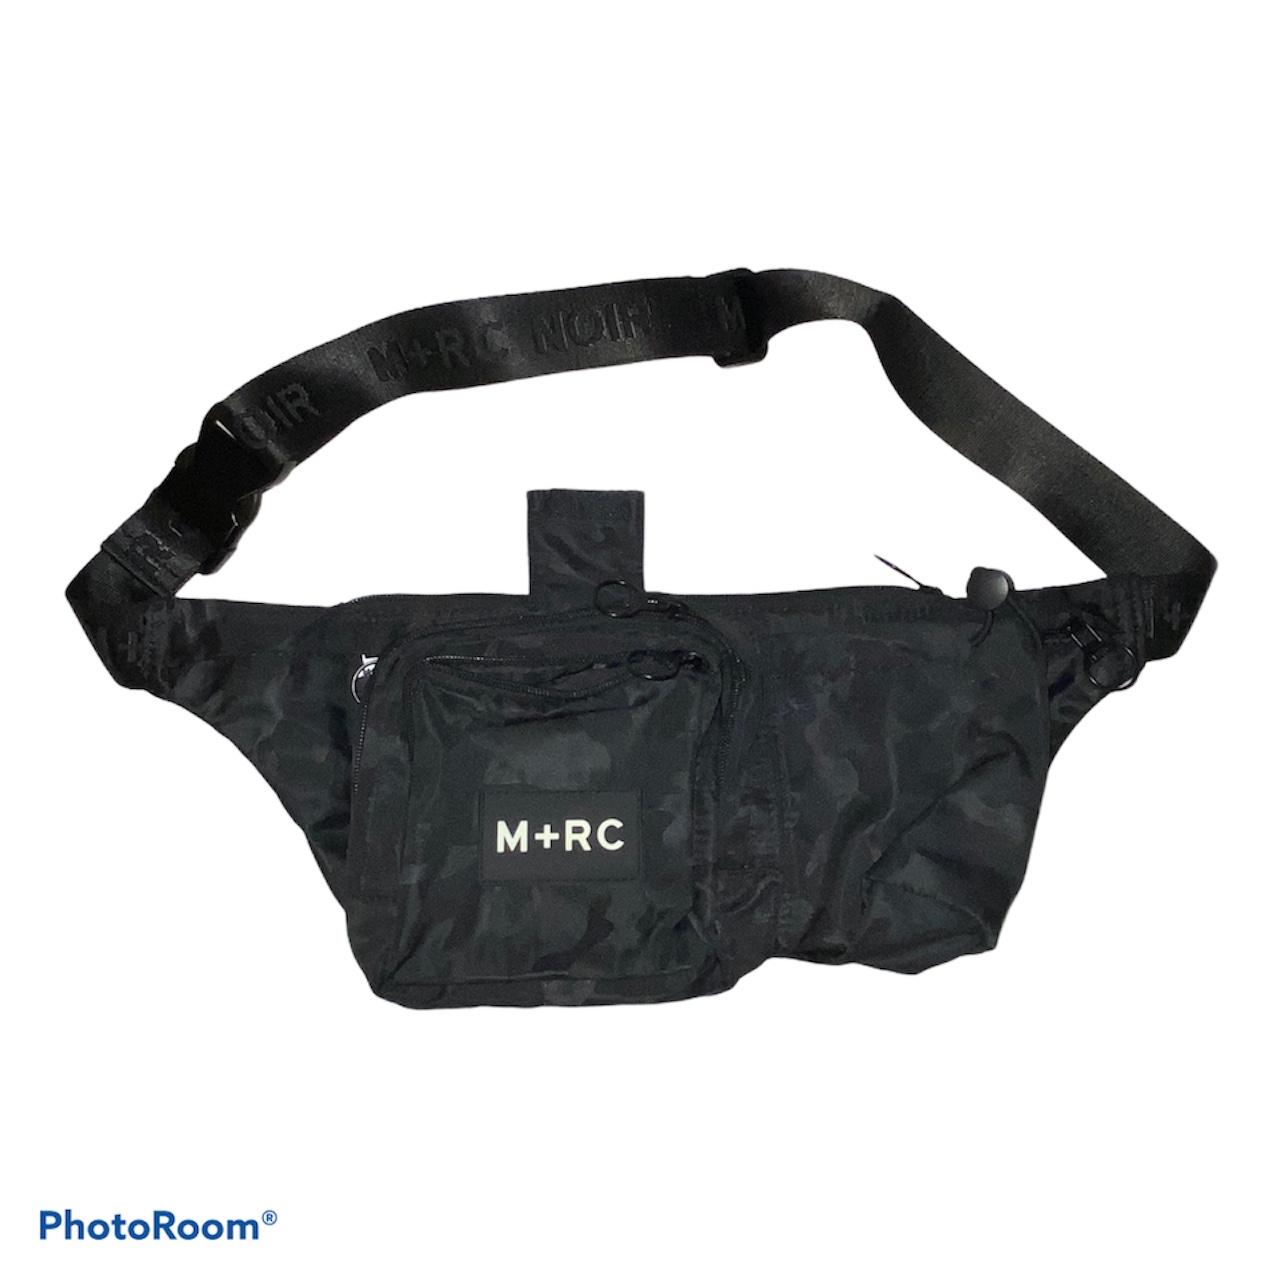 Fire M+RC Noir bag. Basically brand new and unused....